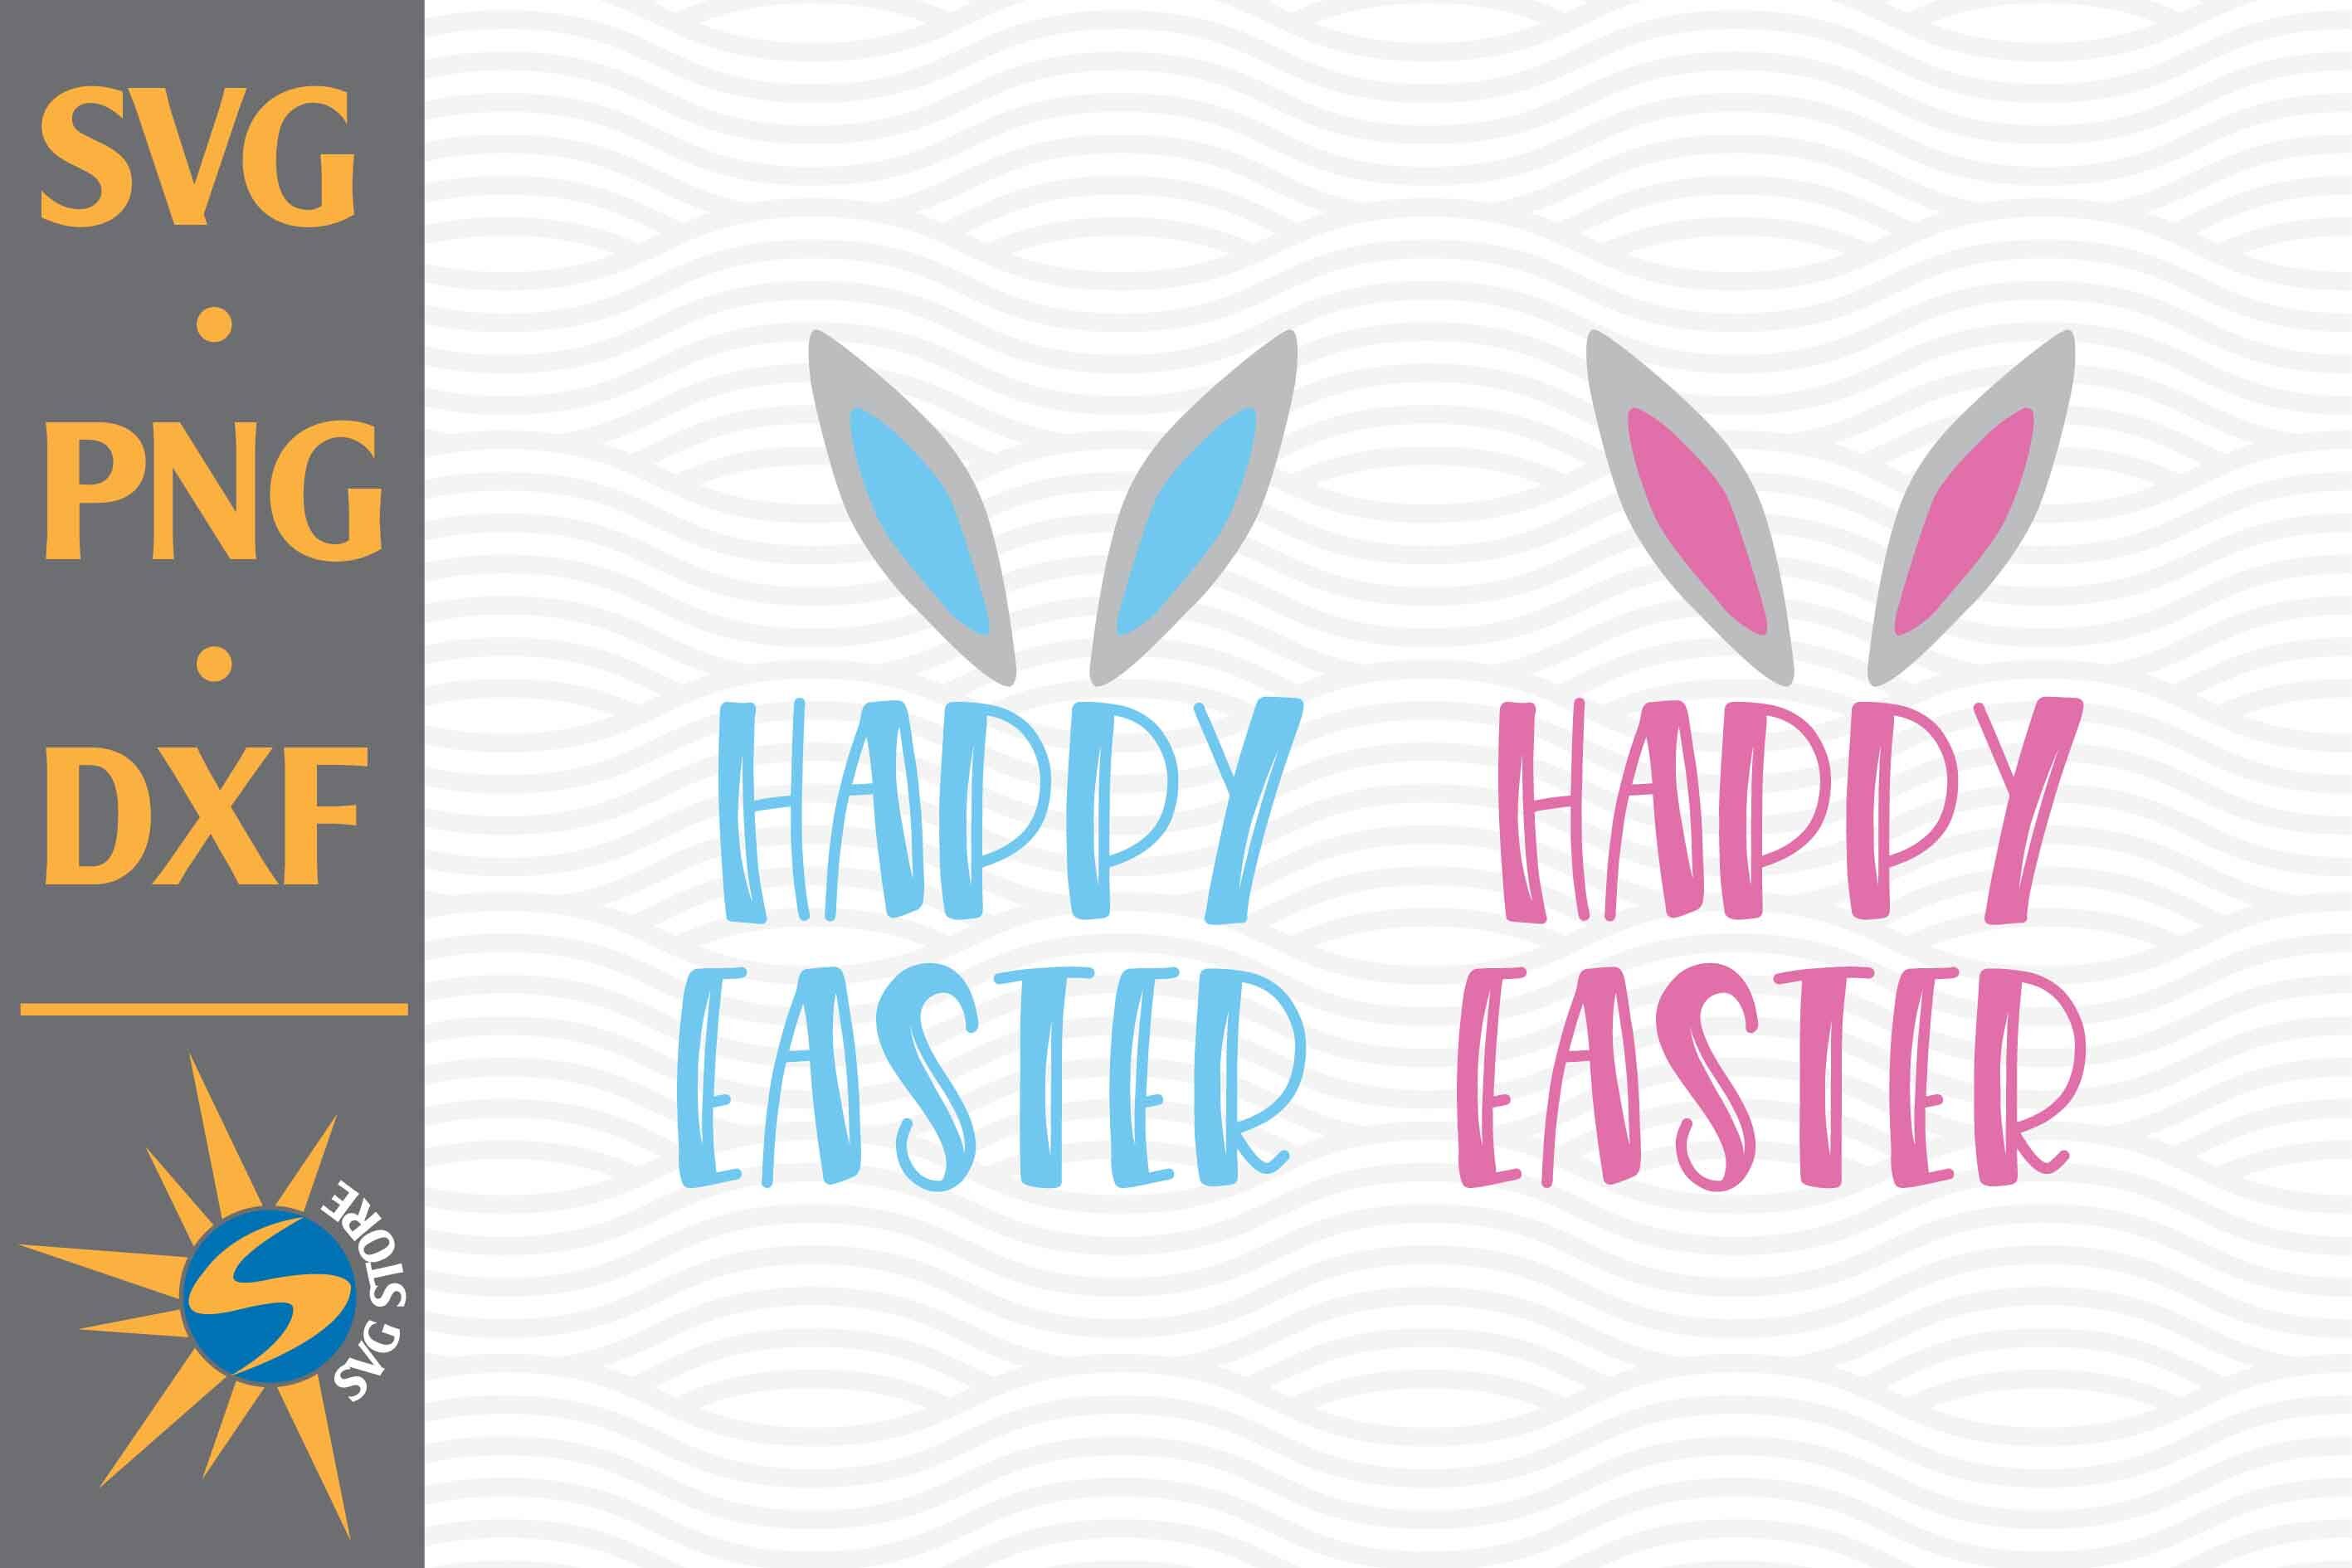 Happy Easter SVG, PNG, DXF Digital Files Include By SVGStoreShop ...